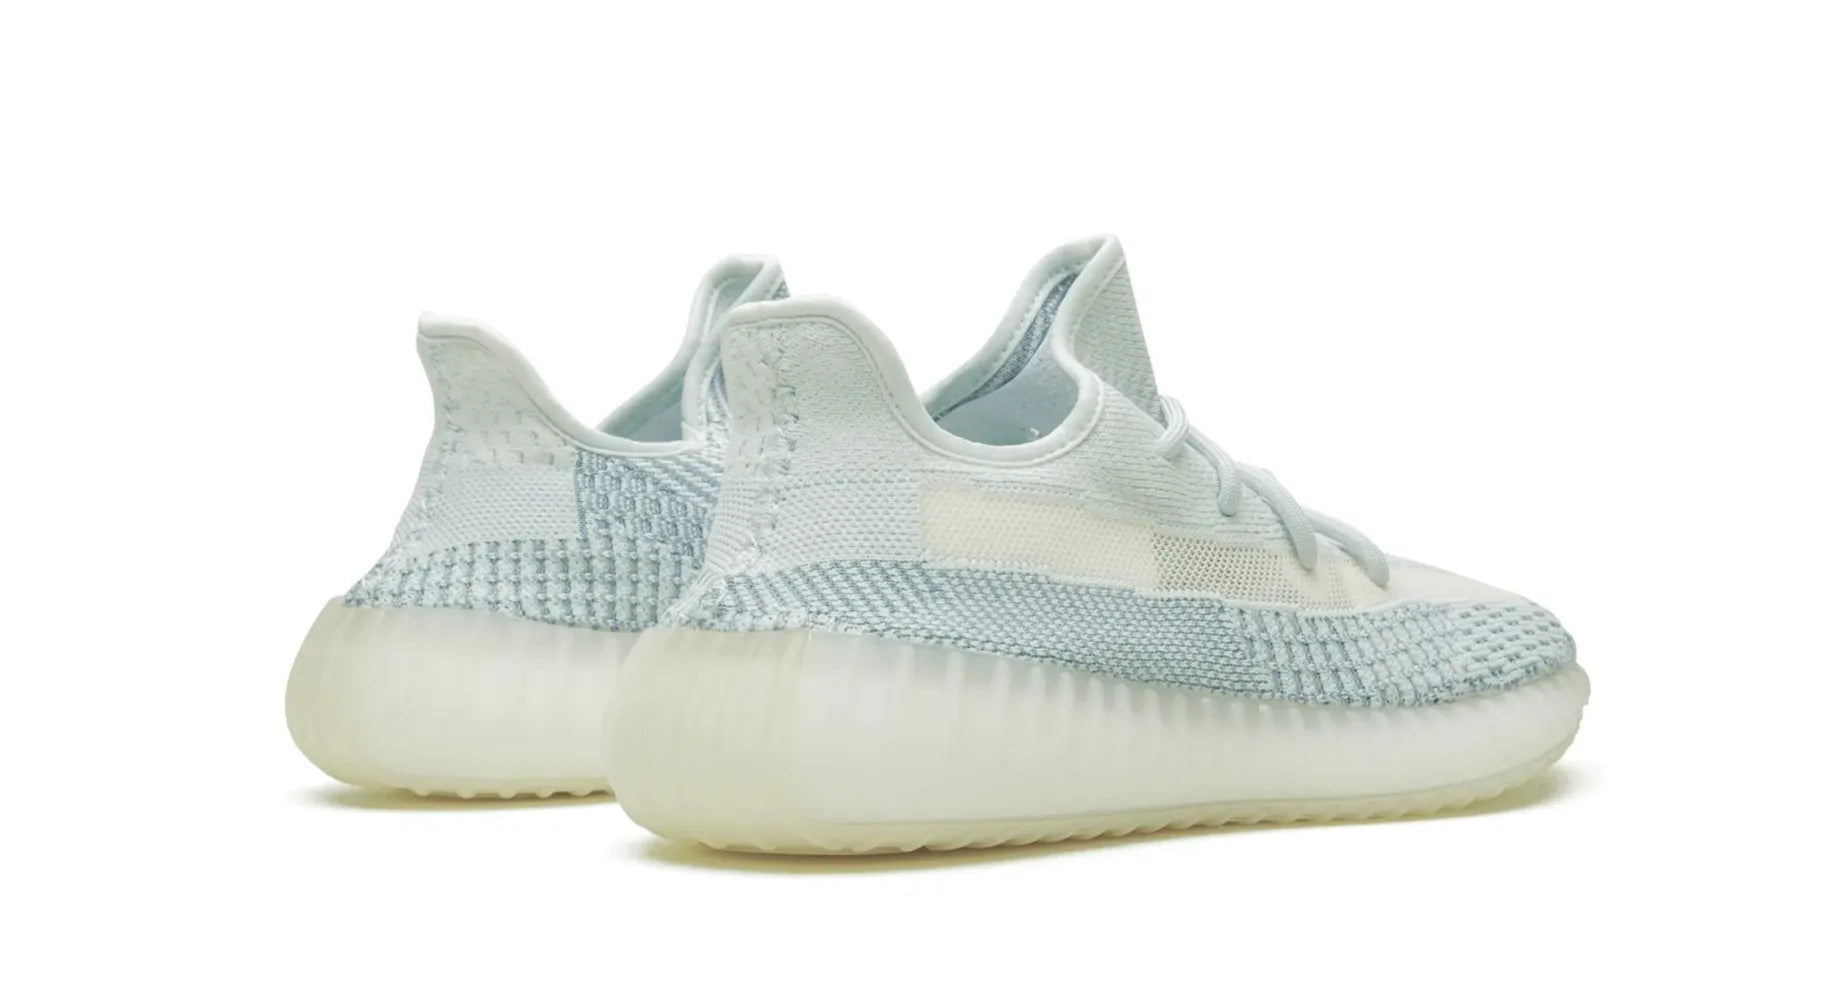 adidas Yeezy Boost 350 V2 Cloud White (Non-Reflective)